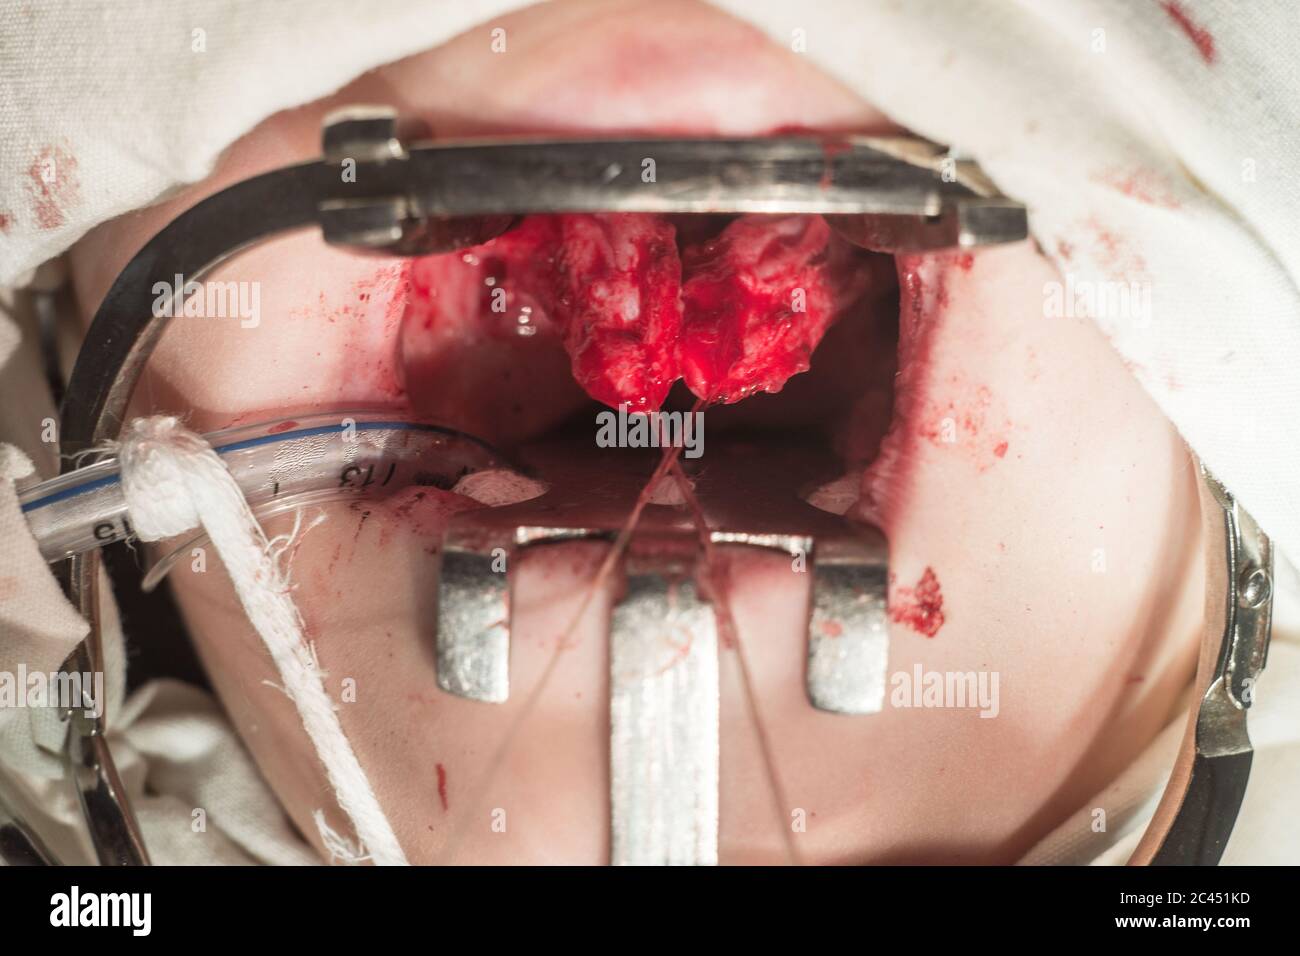 one of the stages of surgery for cleft palate in children. Mouth open with conservative, bloody wounds. Operative dentistry Stock Photo